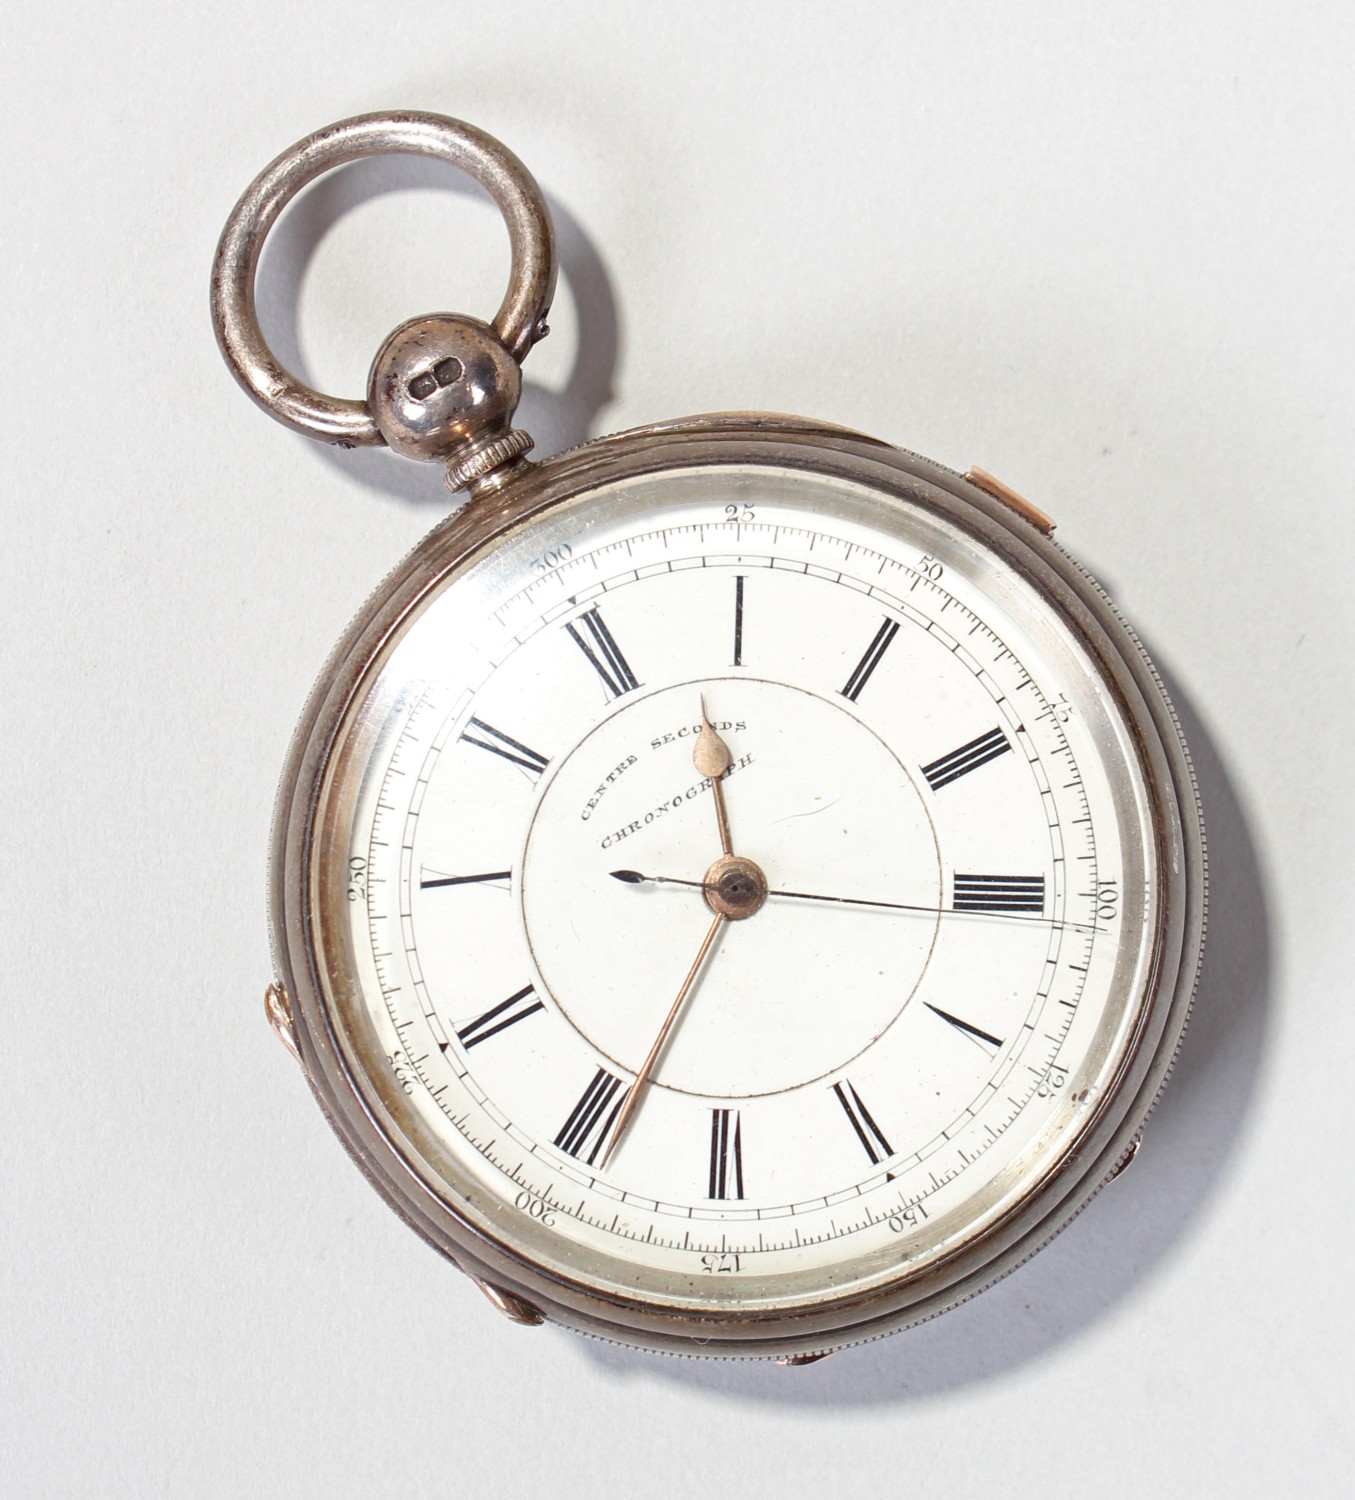 Late Victorian silver open face chronograph pocket watch, Chester 1890, the white enamel dial having